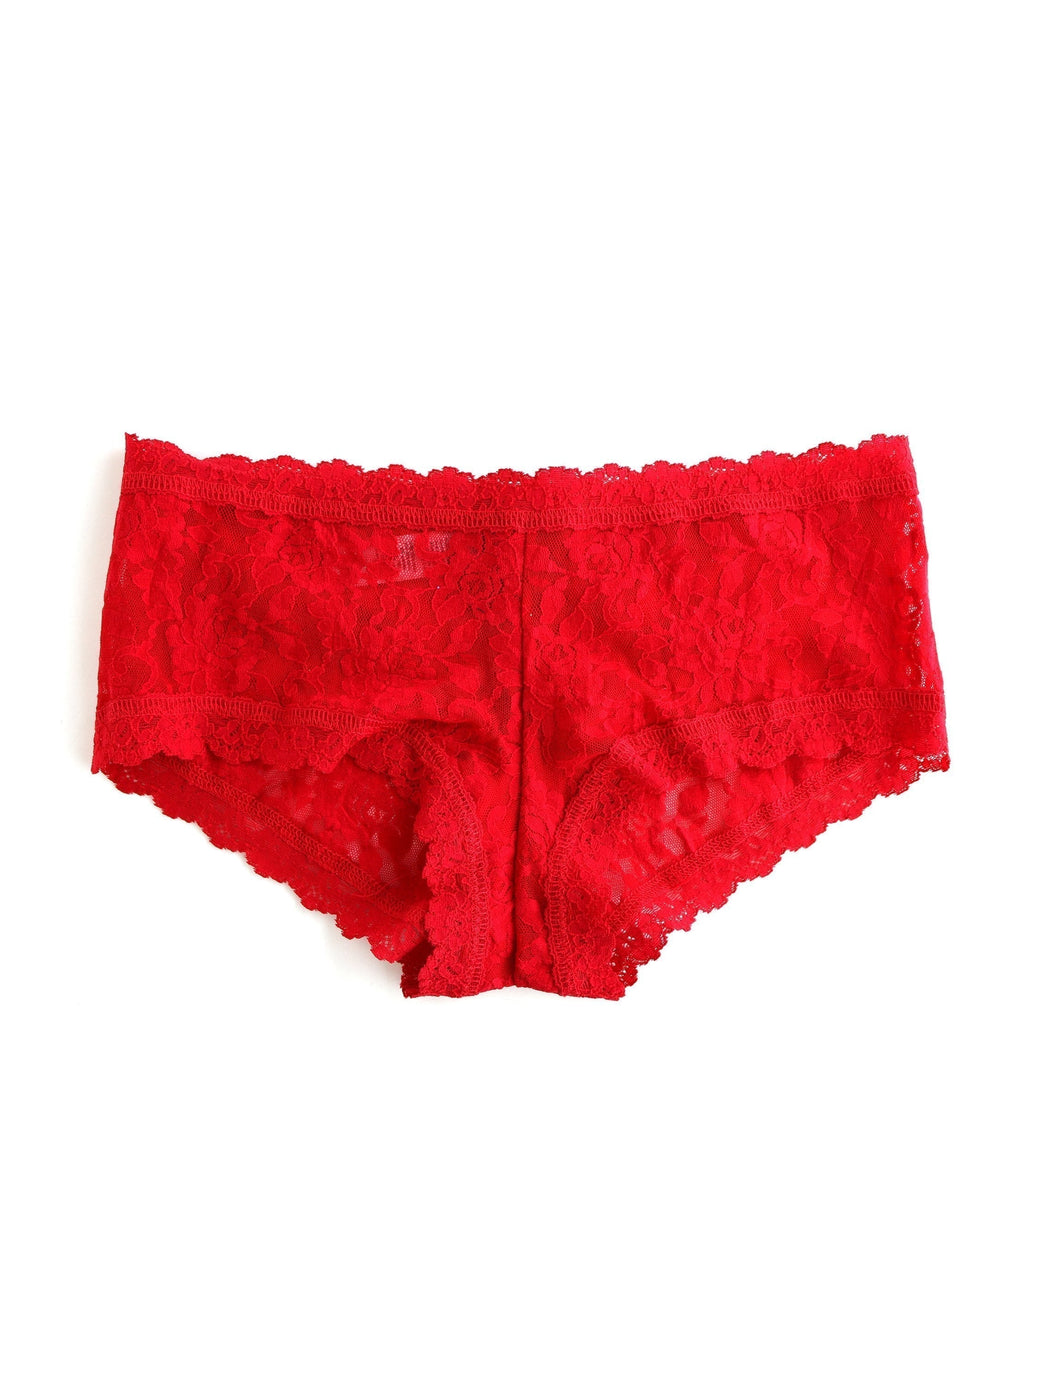 Hanky Panky Signature Lace Boyshort in Red, available at LaSource in Darien.